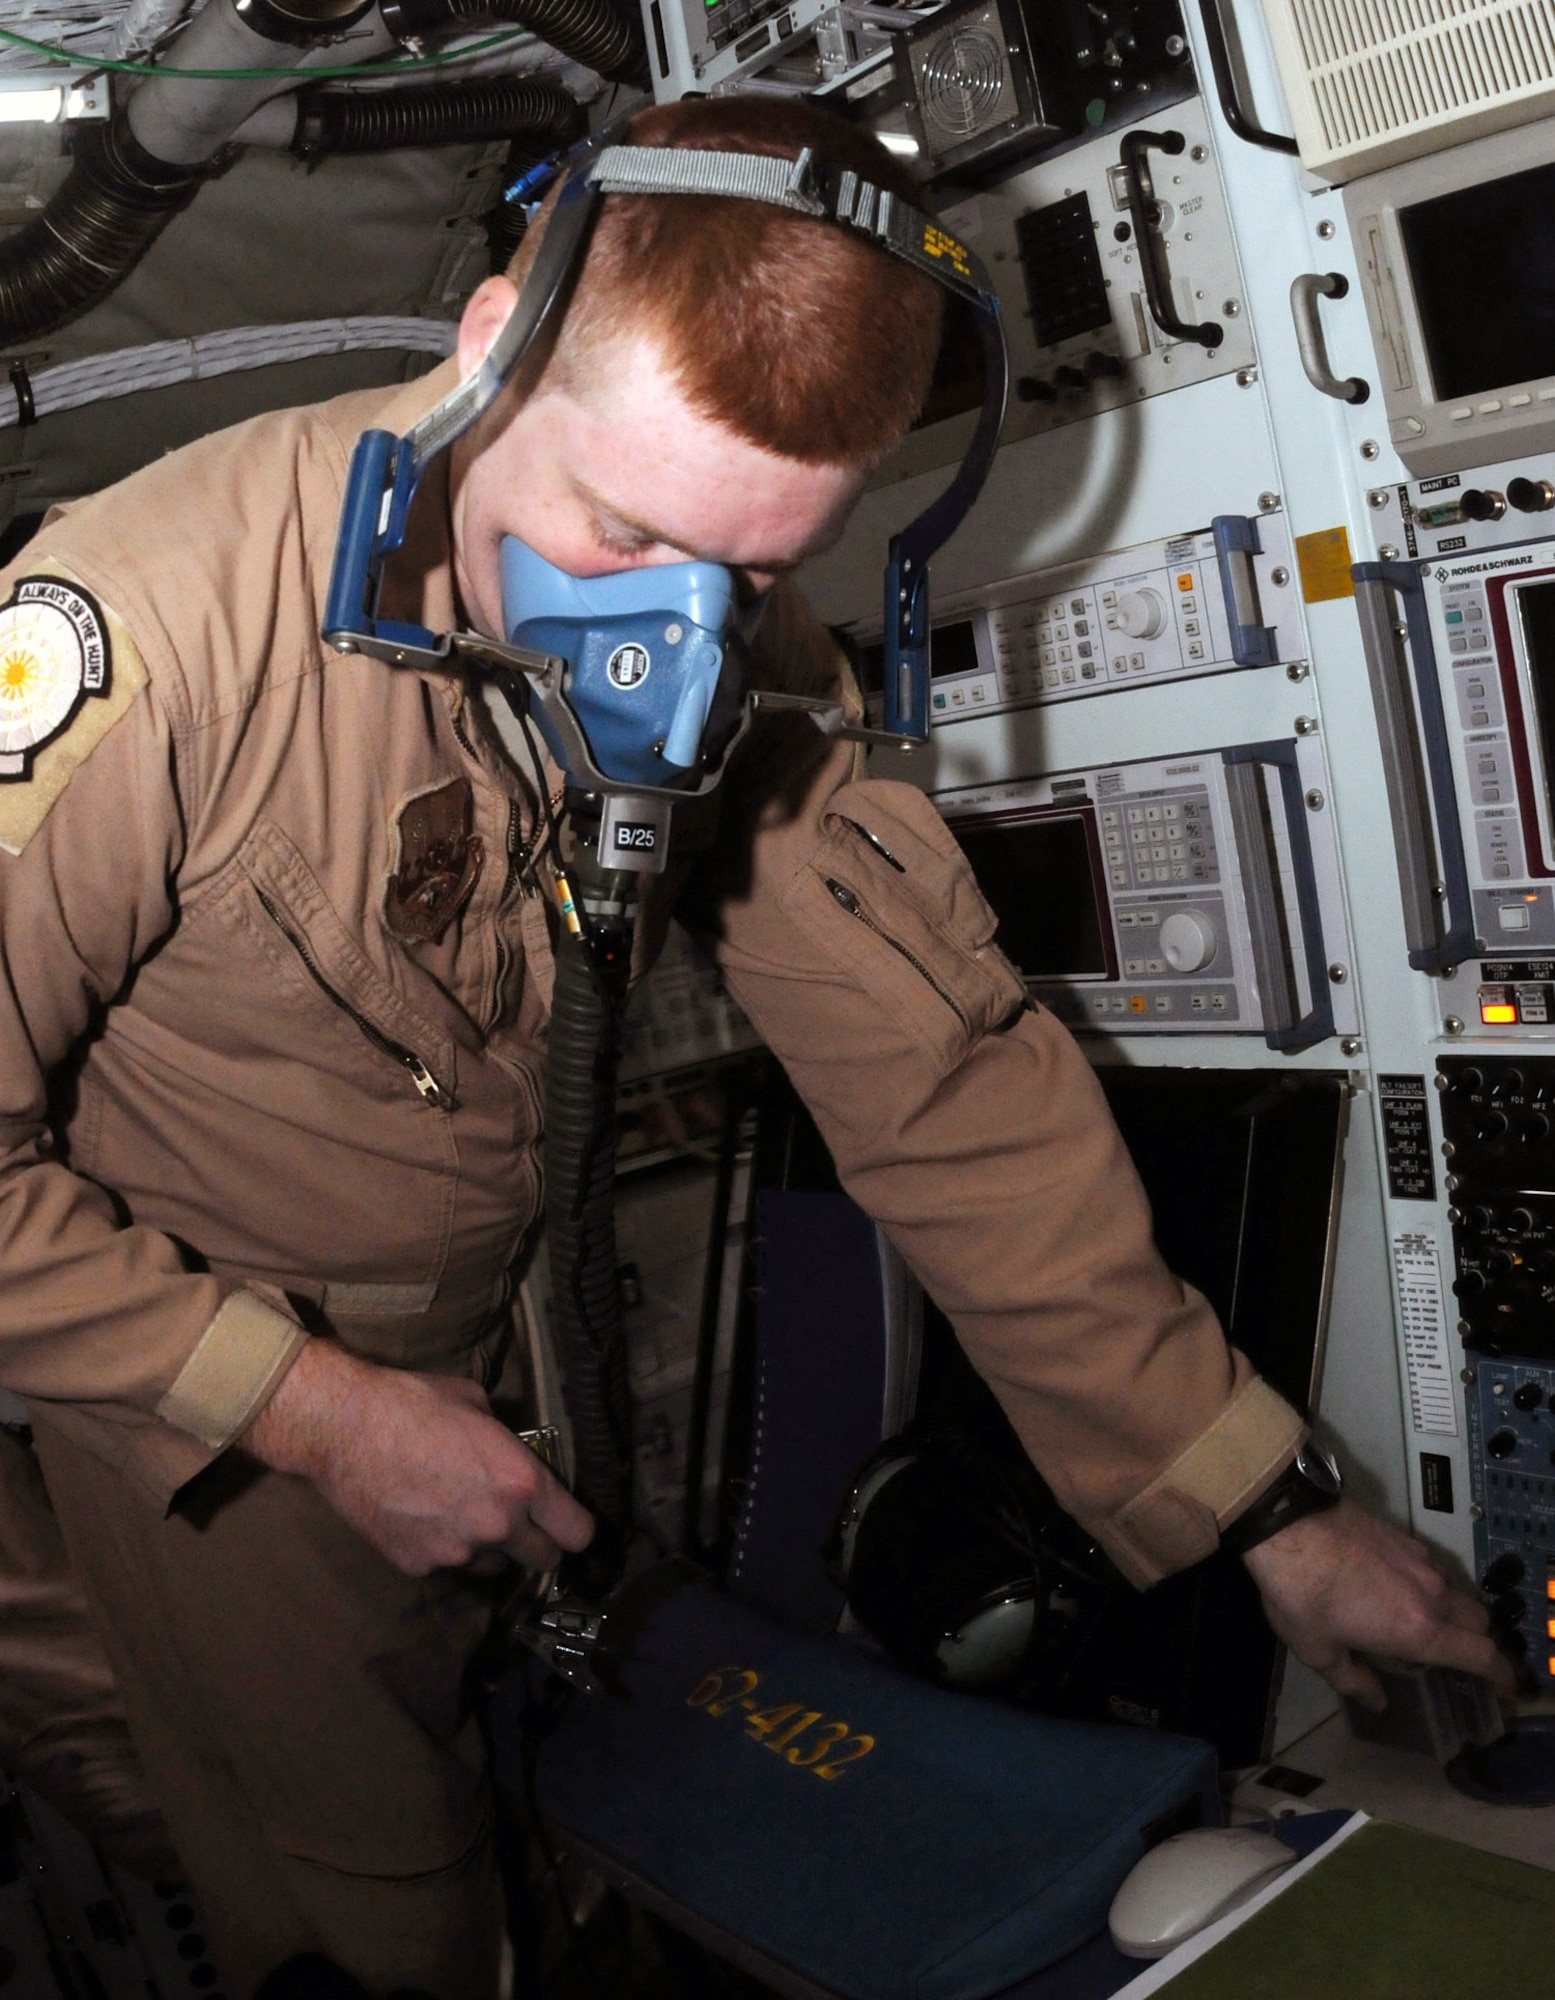 Staff Sgt. William Bryan checks the oxygen flow inside a  mask aboard a RC-135 Rivet Joint aircraft Jan. 30 in Southwest Asia. Cockpit crews, intelligence experts, electronic warfare officers, and in-flight maintenance technicians have rotated into and out of Southwest Asia along with the aircraft for a variety of duties over the past 17 years. Sergeant Bryan is an airborne systems engineer with the 763rd Expeditionary Reconnaissance Squadron and is deployed from Offutt Air Force Base, Neb. (U.S. Air Force photo/Senior Airman Domonique Simmons)